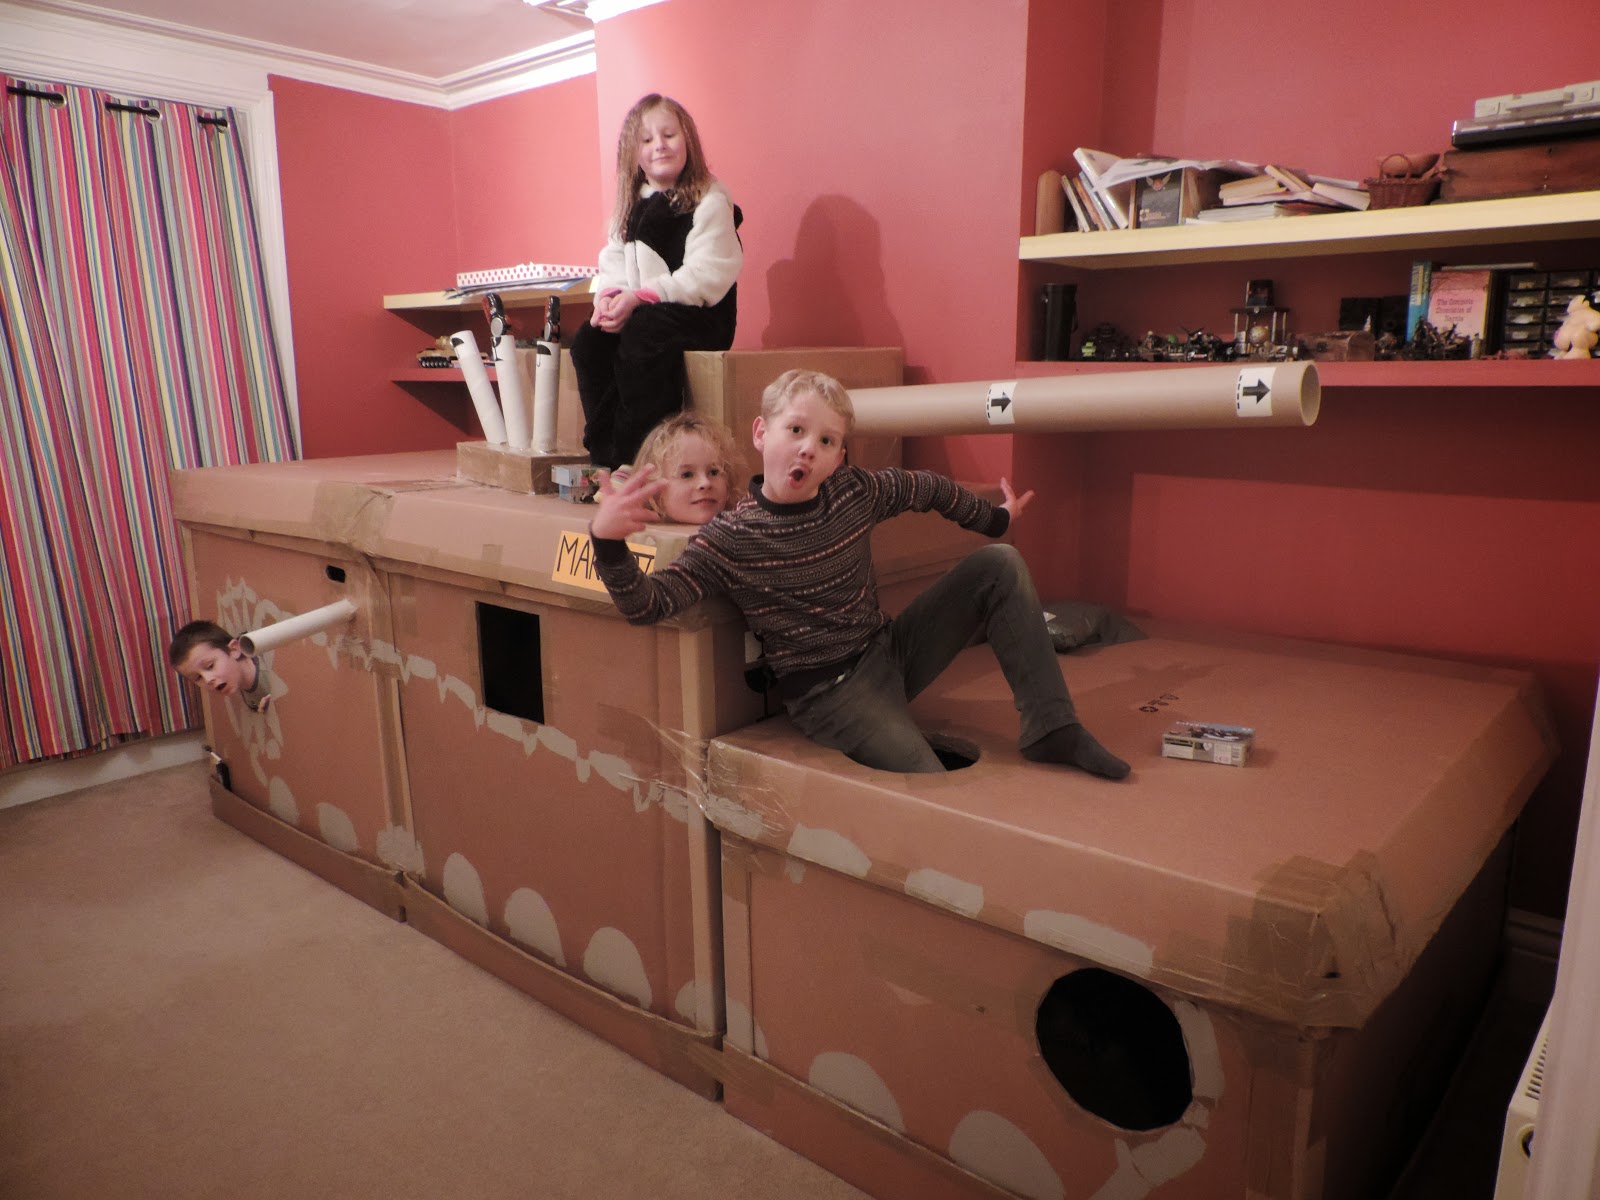 giant tank armoured division keep kids happy during party